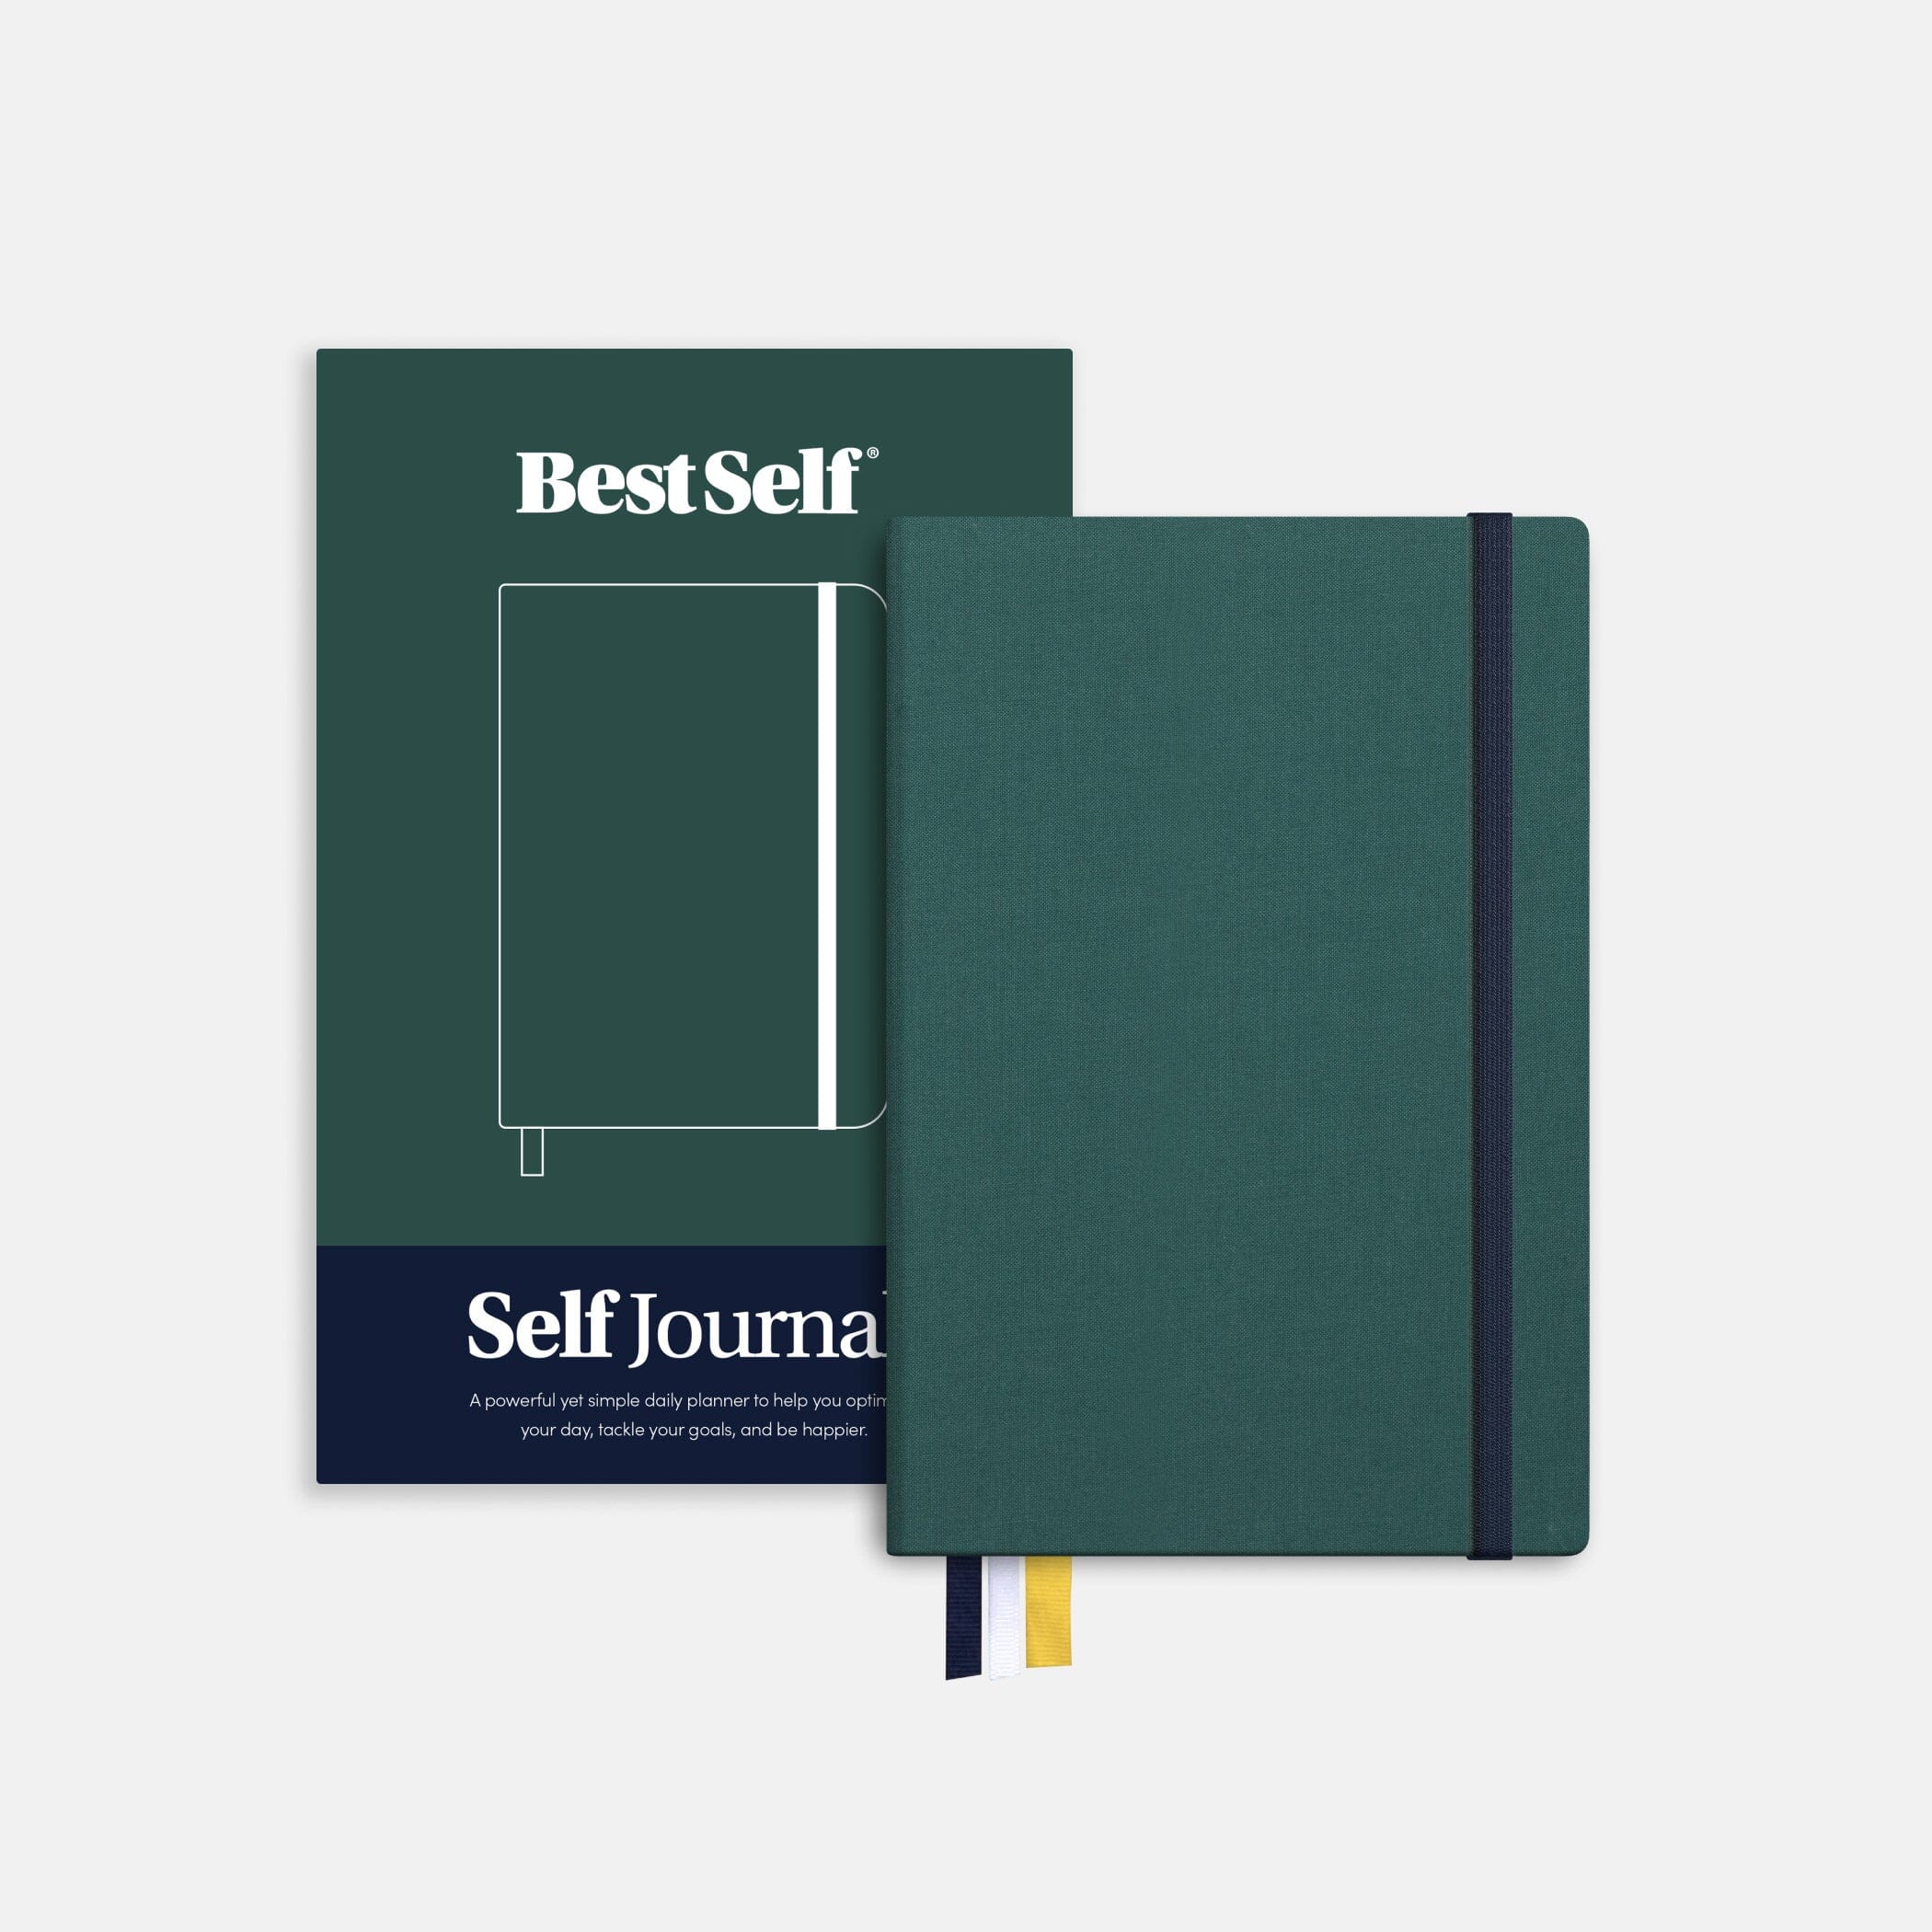 Self Journal Journal Personal Growth